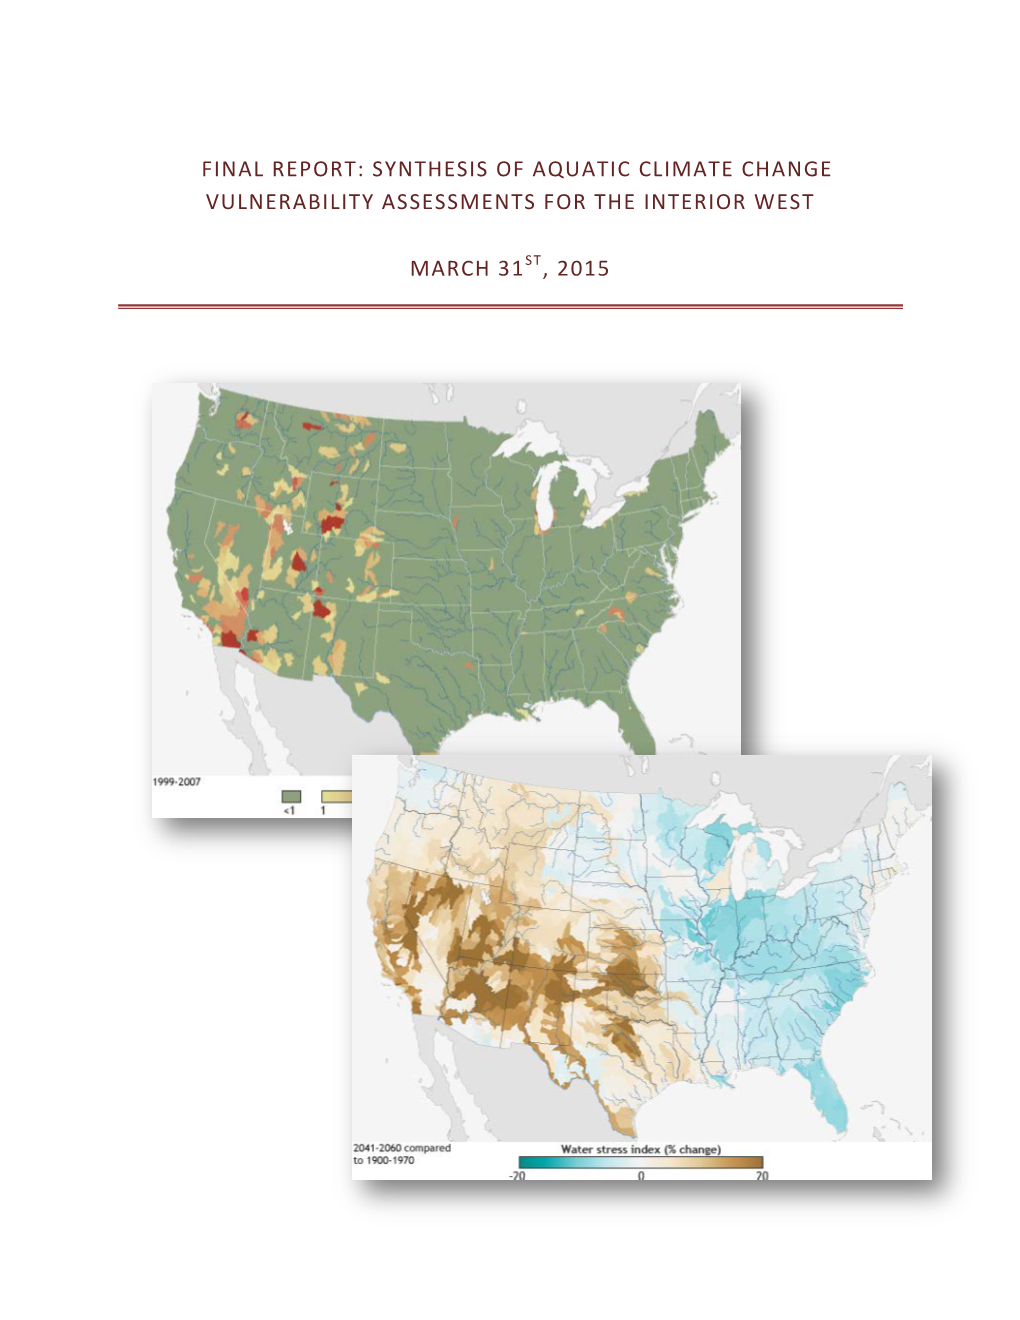 Synthesis of Aquatic Climate Change Vulnerability Assessments for the Interior West